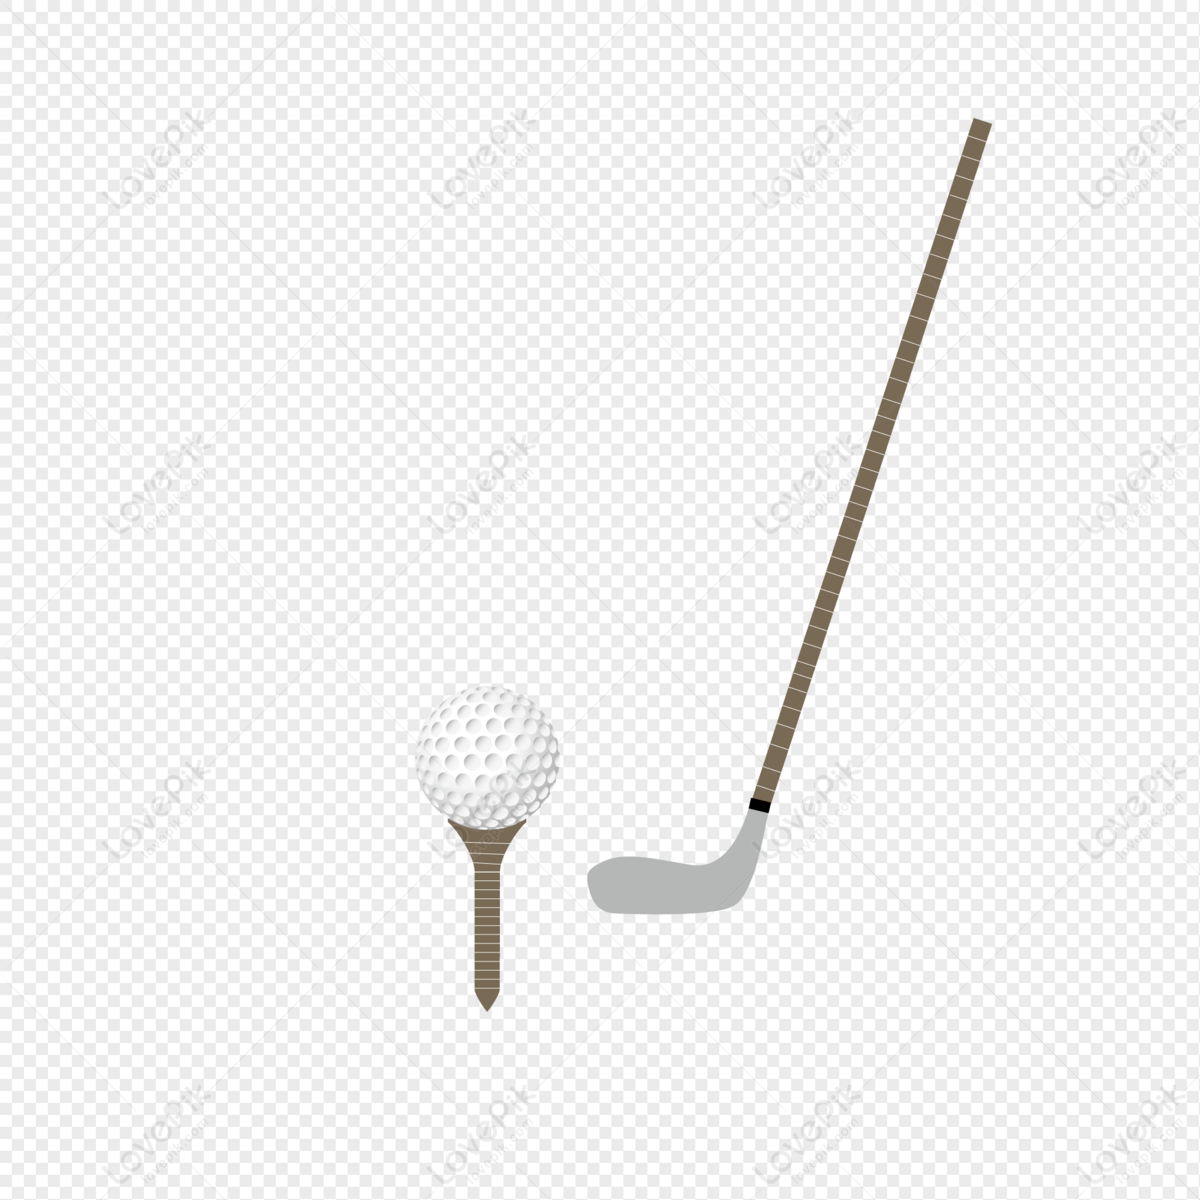 Ai Vector Cartoon Golf Sport Equipment Elements PNG Transparent And Clipart  Image For Free Download - Lovepik | 401366206